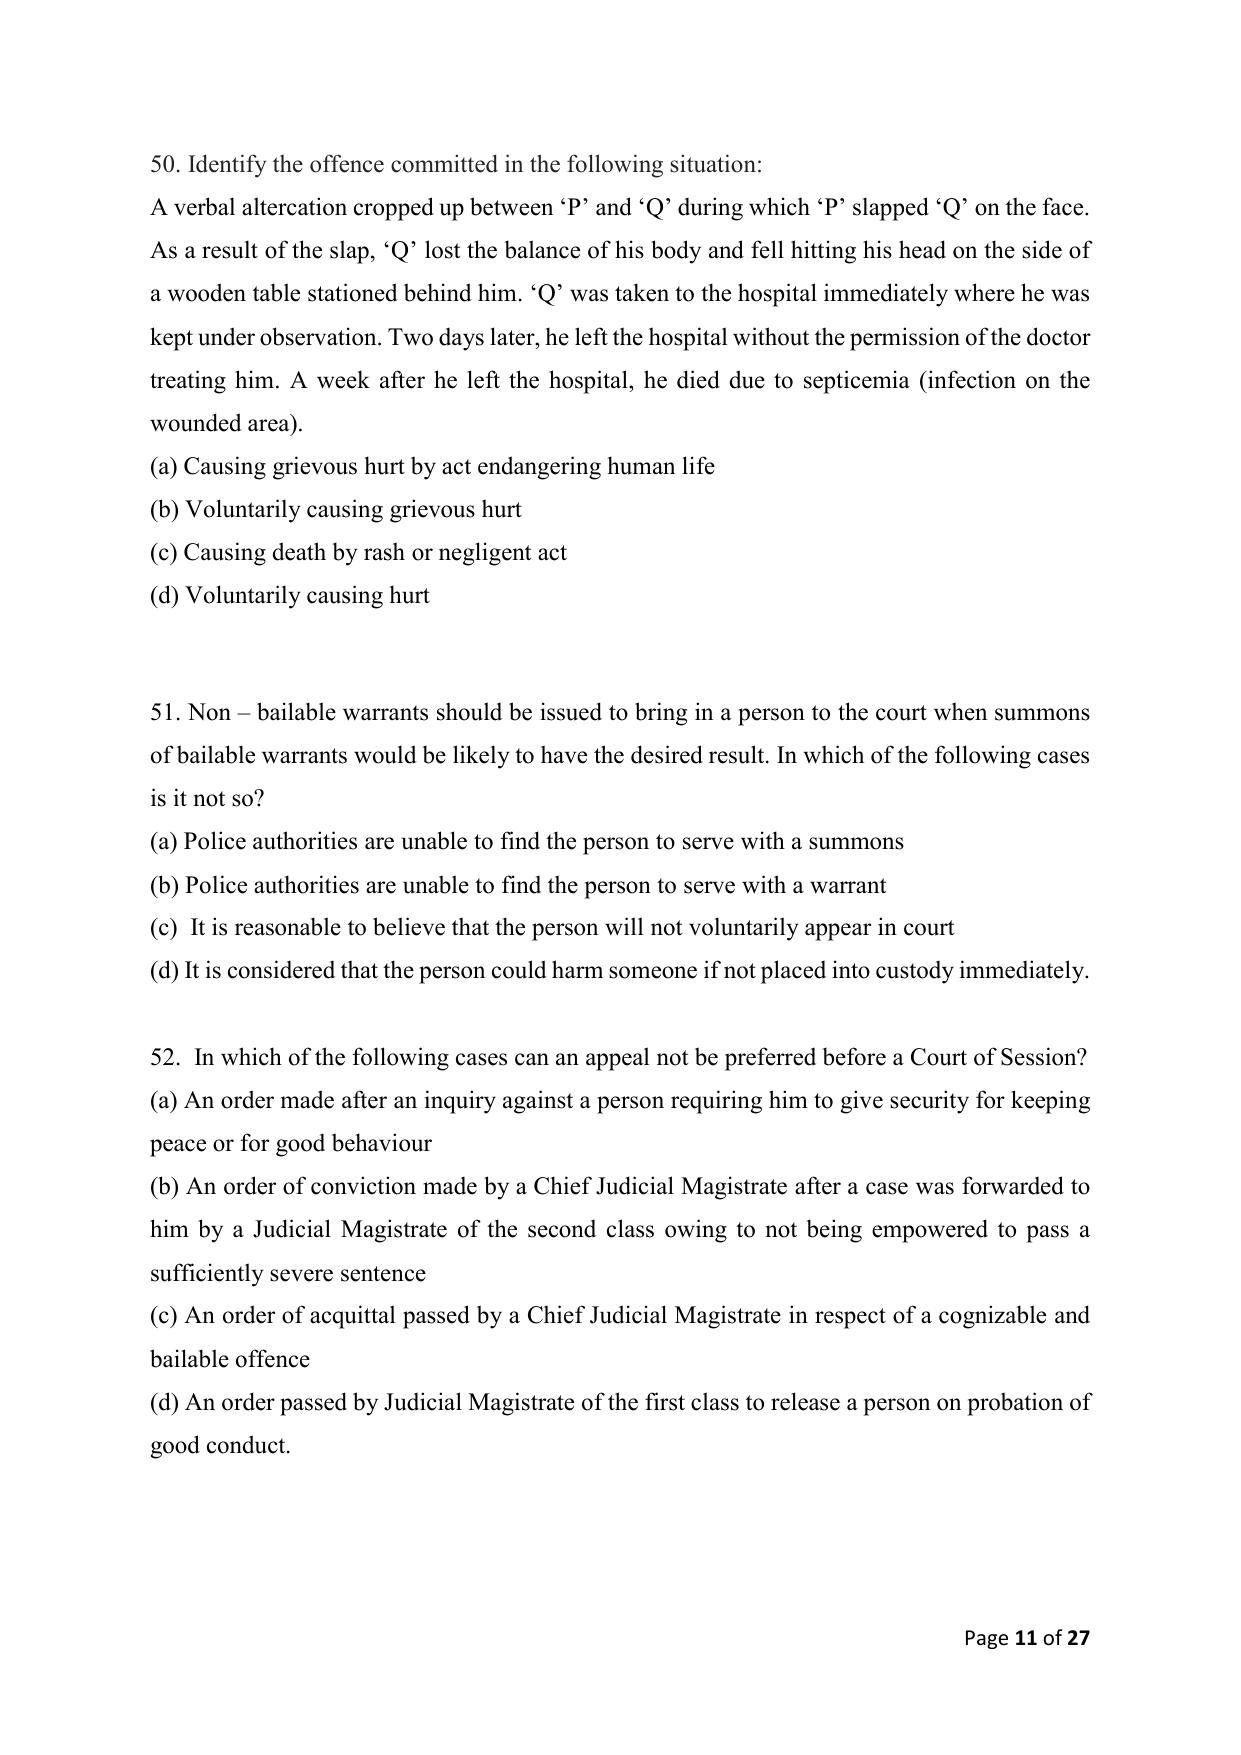 AILET 2020 Question Paper for LLM - Page 11